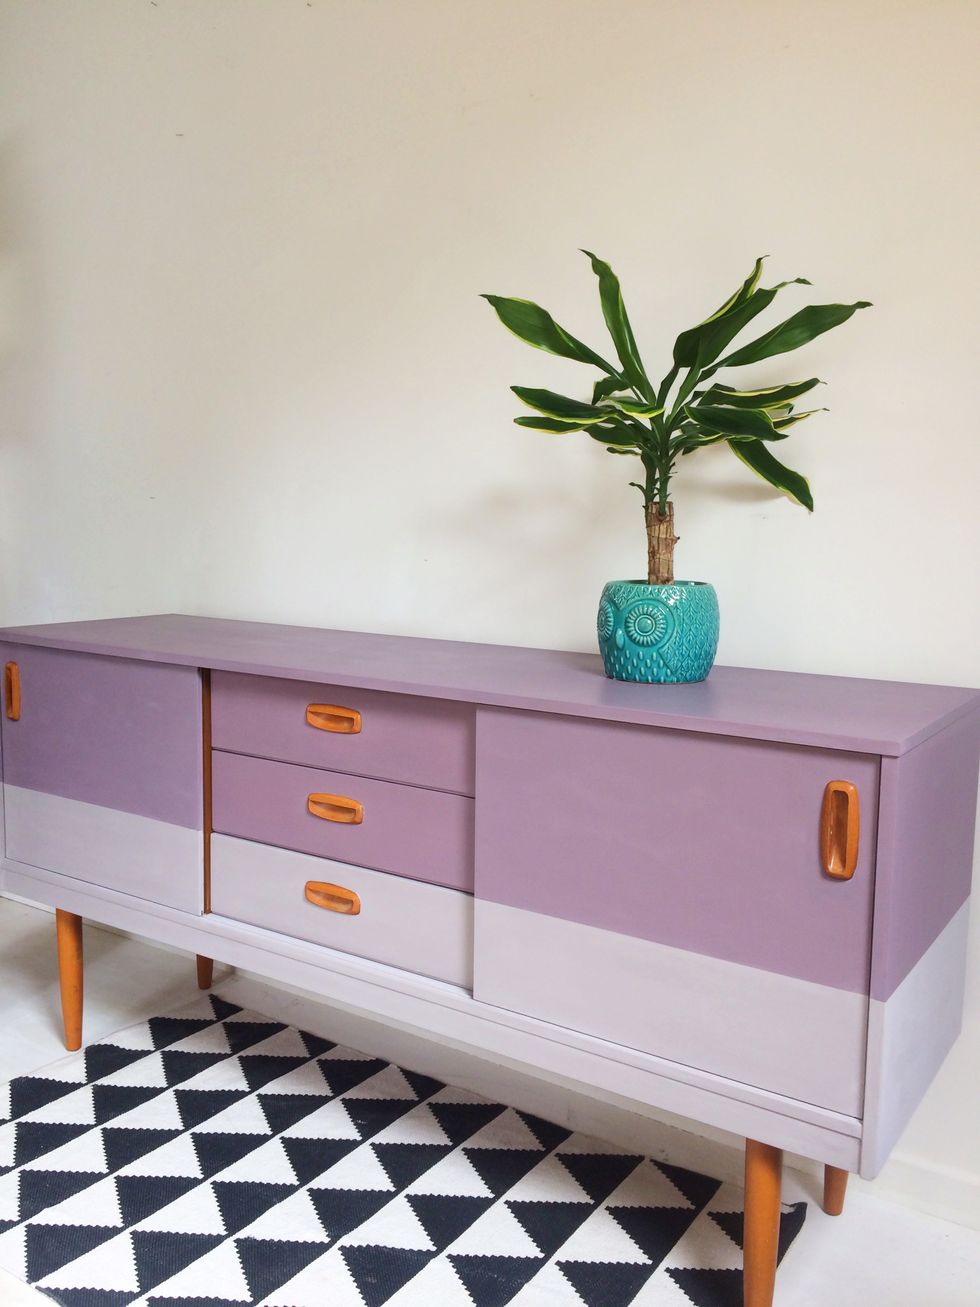 Product, Chest of drawers, Sideboard, Flowerpot, Drawer, Purple, Lavender, Turquoise, Teal, Cabinetry, 